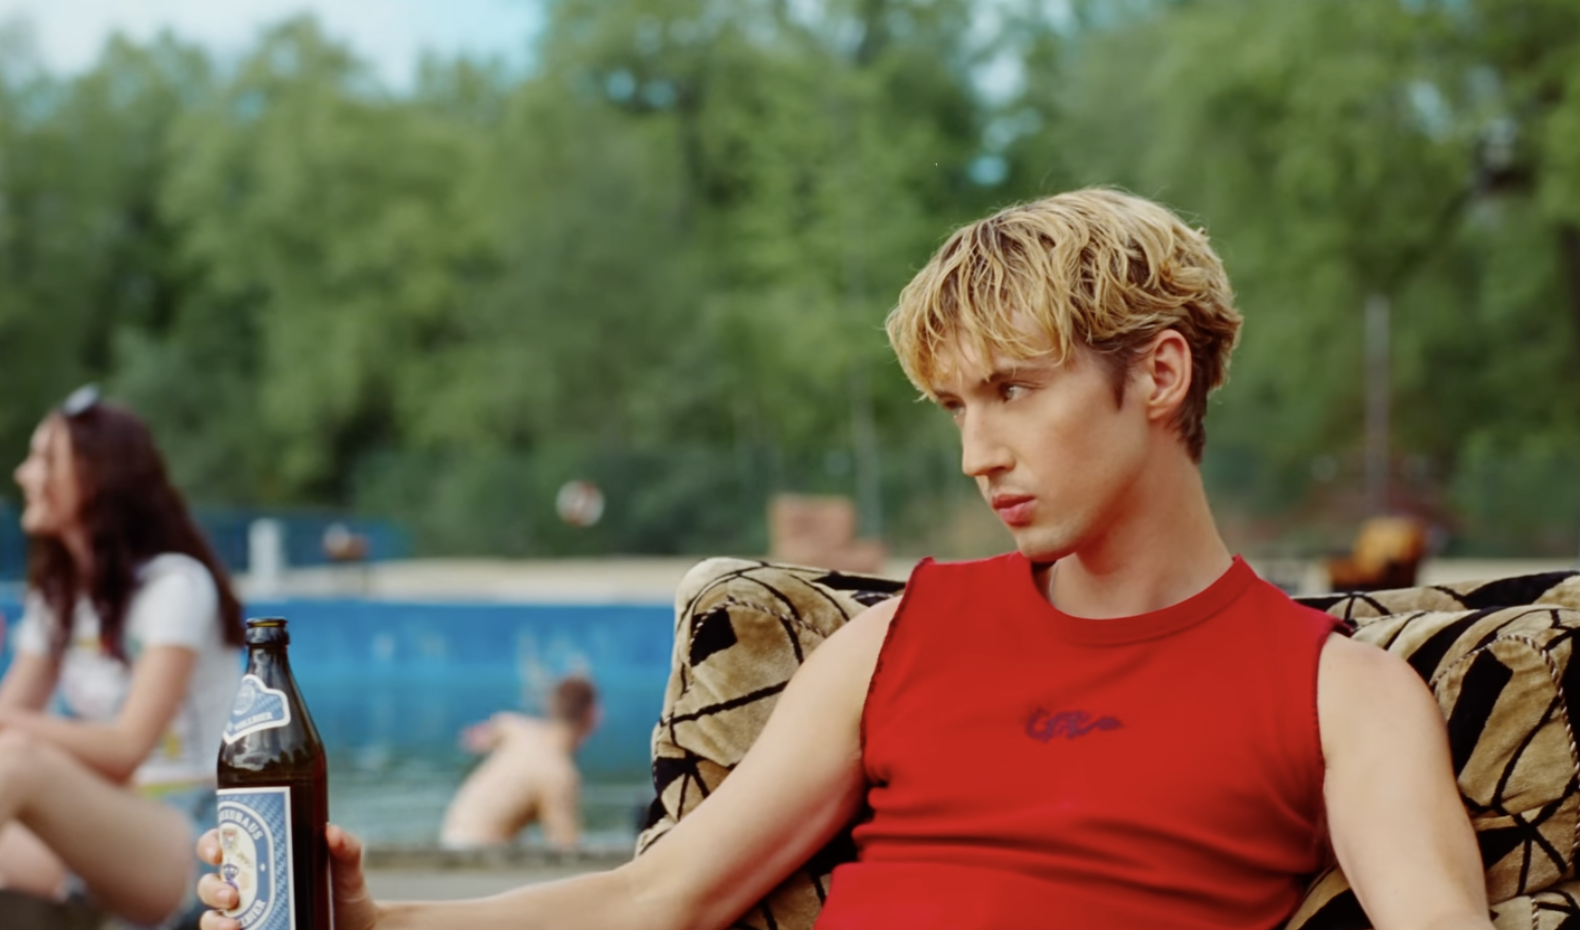 Troye Sivan in a sleeveless top sits on a patterned chair holding a beer bottle at an outdoor pool area. Another person is blurred in the background